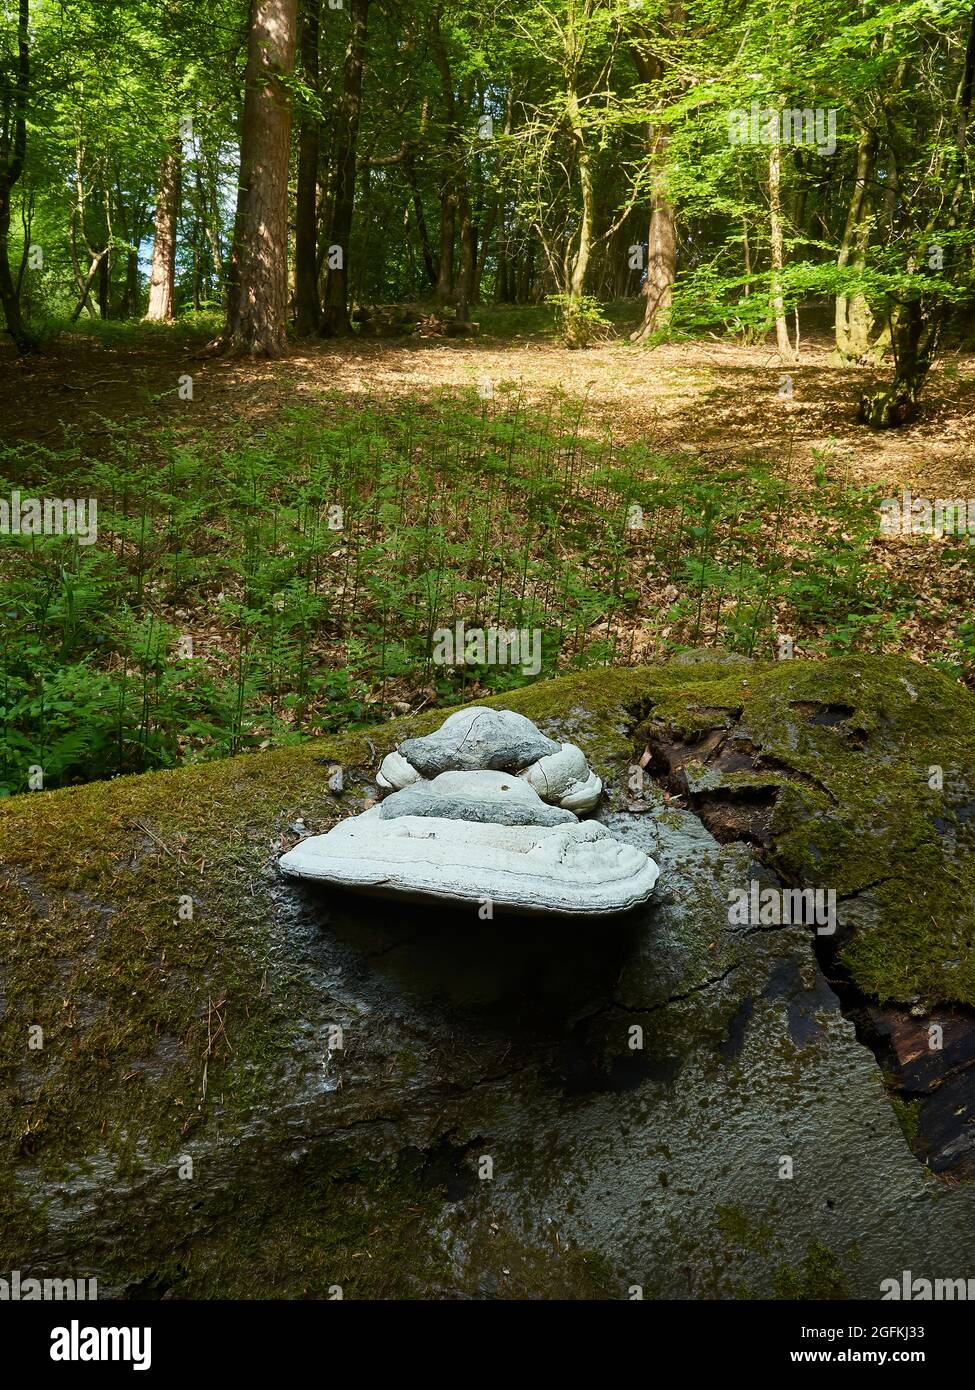 Colossal fungi, the size of dinner plants, on a fallen, moss covered tree trunk in a woodland clearing filled with dappled sunshine. Stock Photo